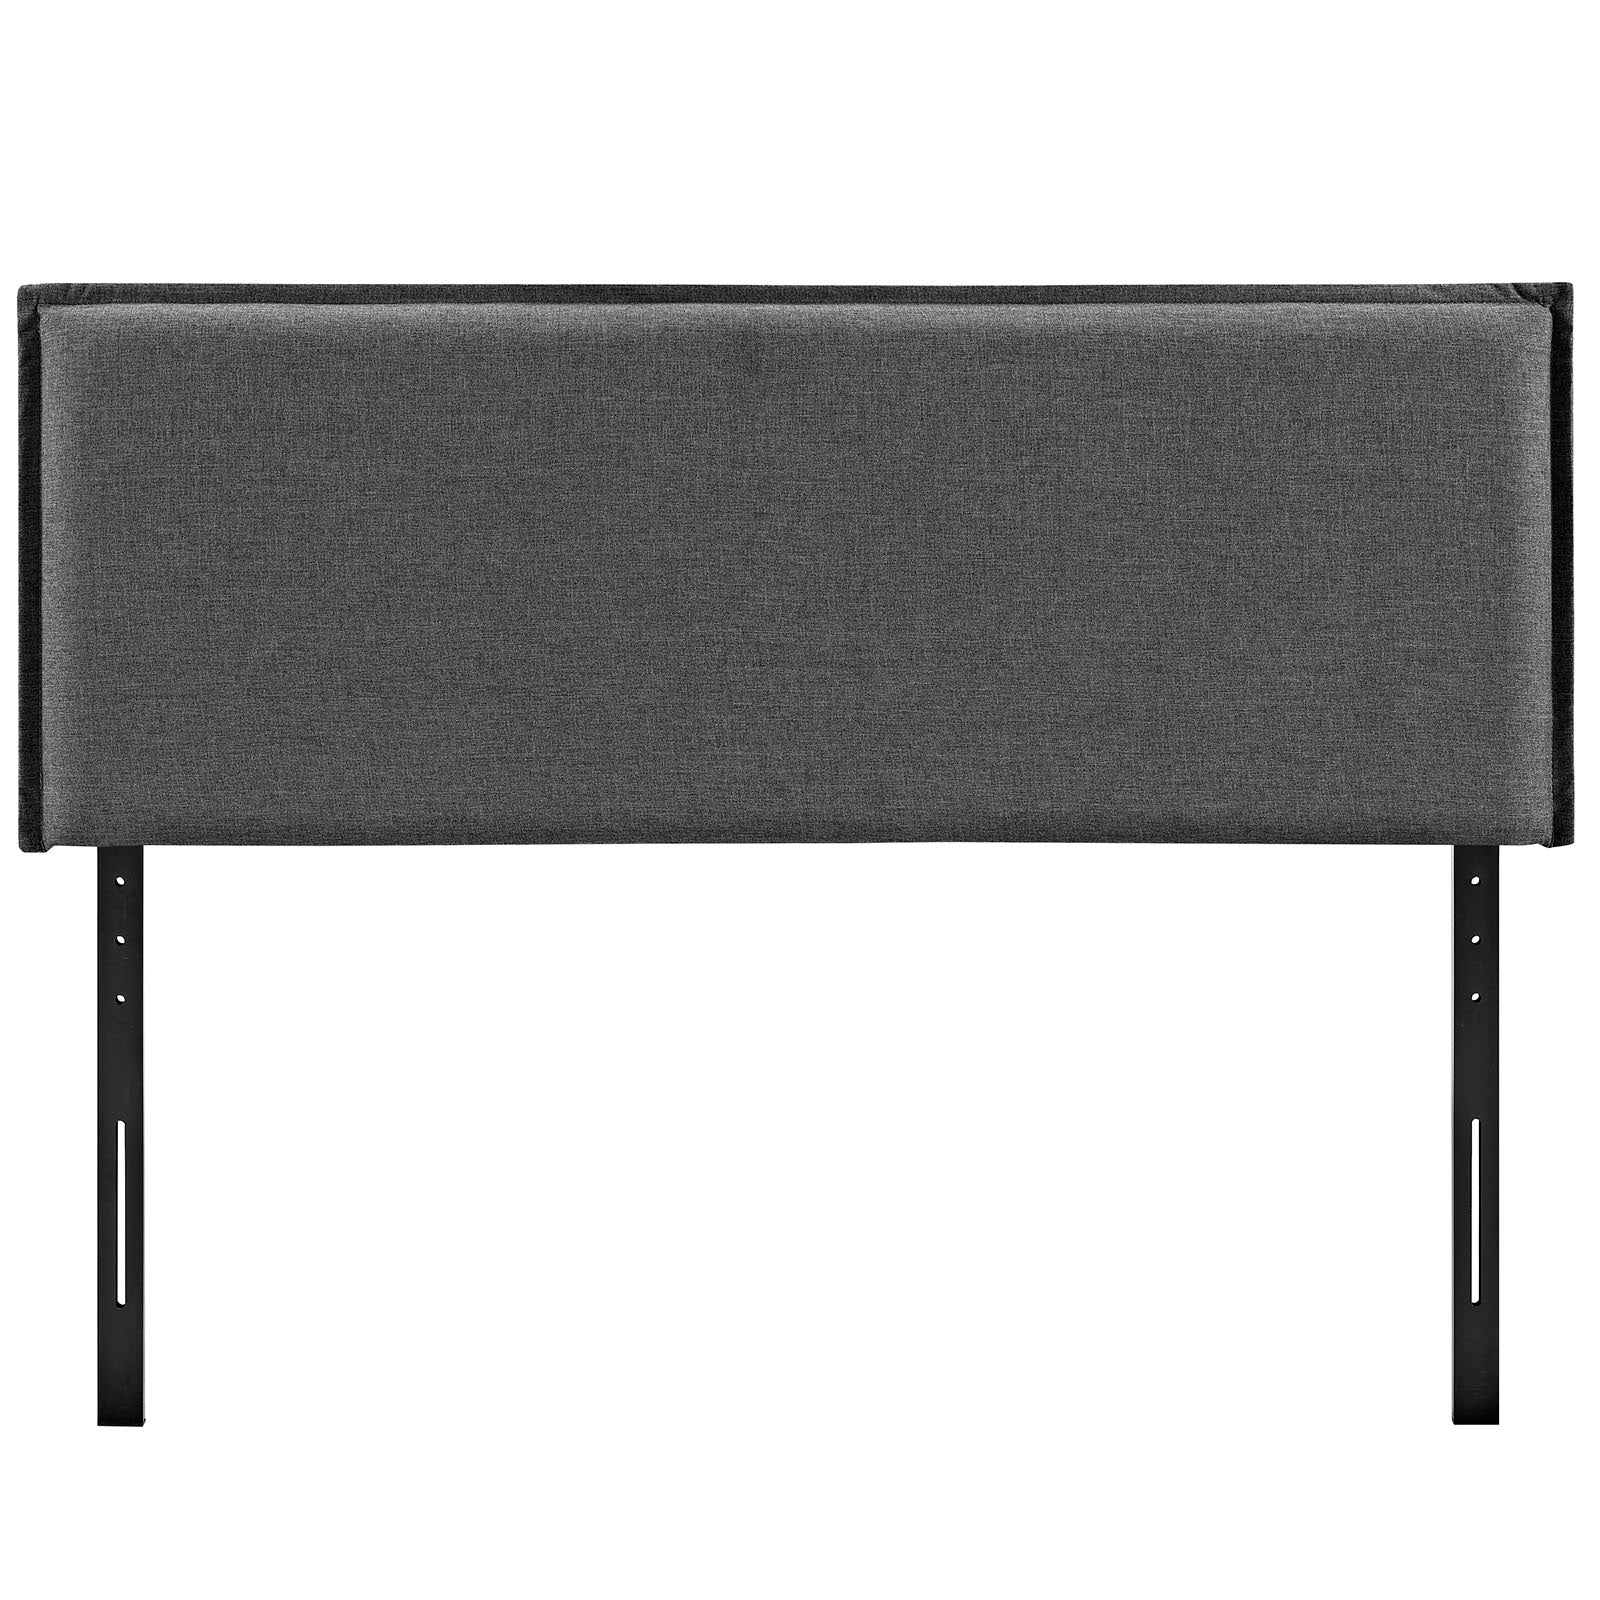 Camille Queen Upholstered Fabric Headboard - East Shore Modern Home Furnishings